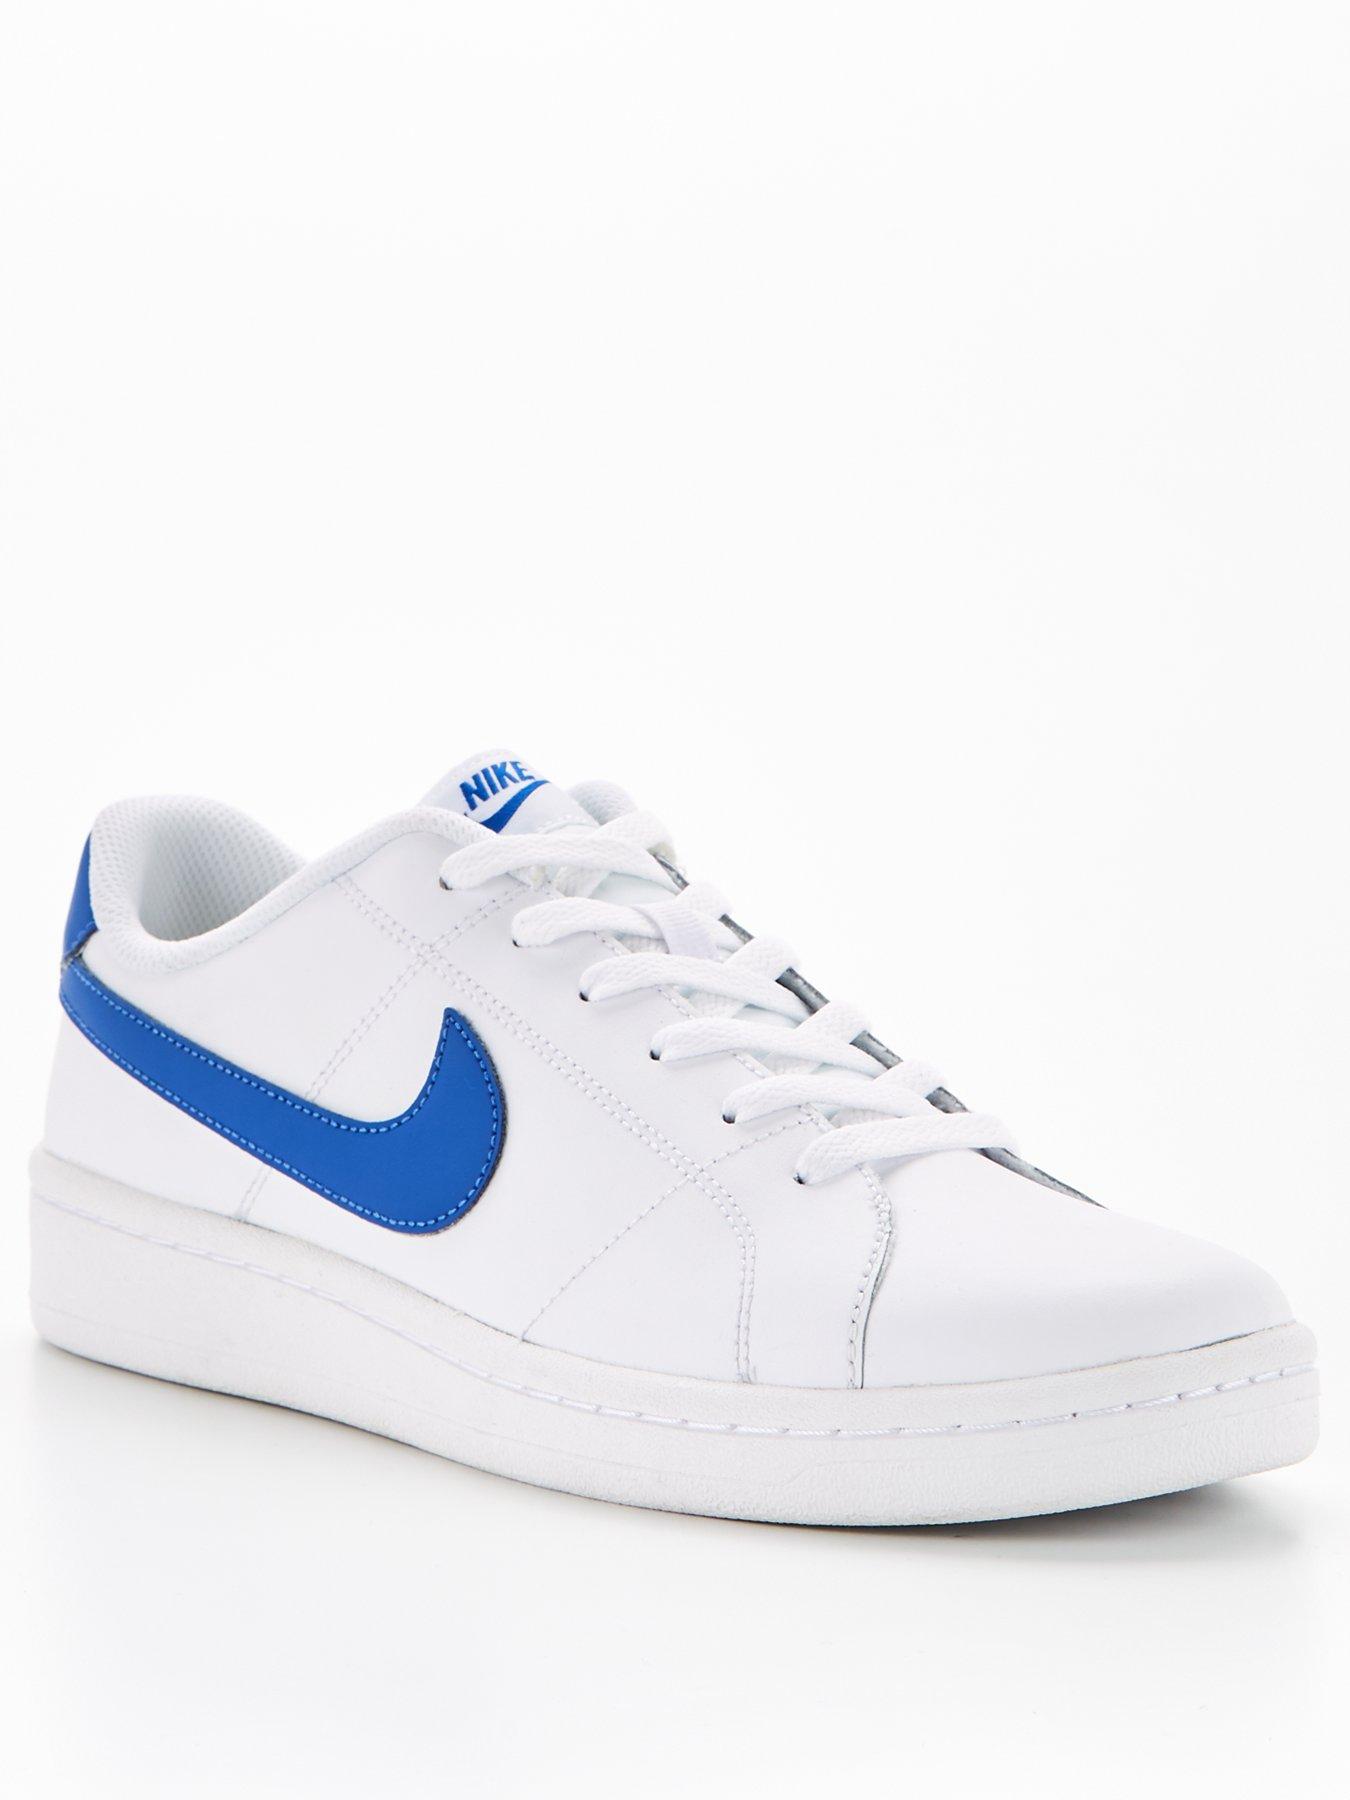 Nike Court Royale 2 Low White/Blue very co uk